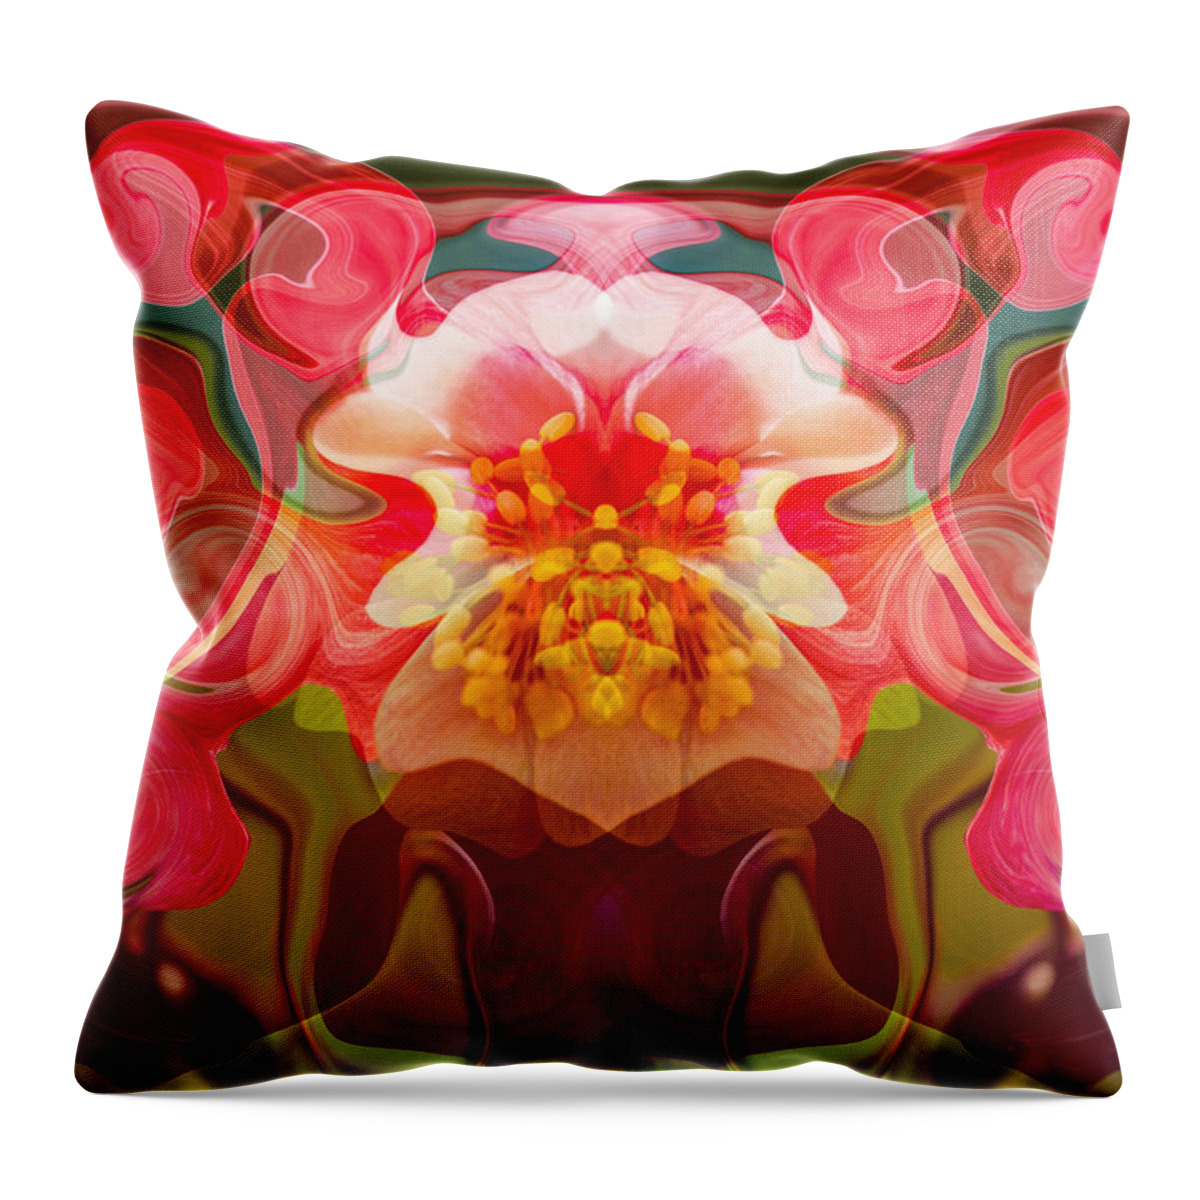 Abstract Throw Pillow featuring the painting Flower Child by Omaste Witkowski